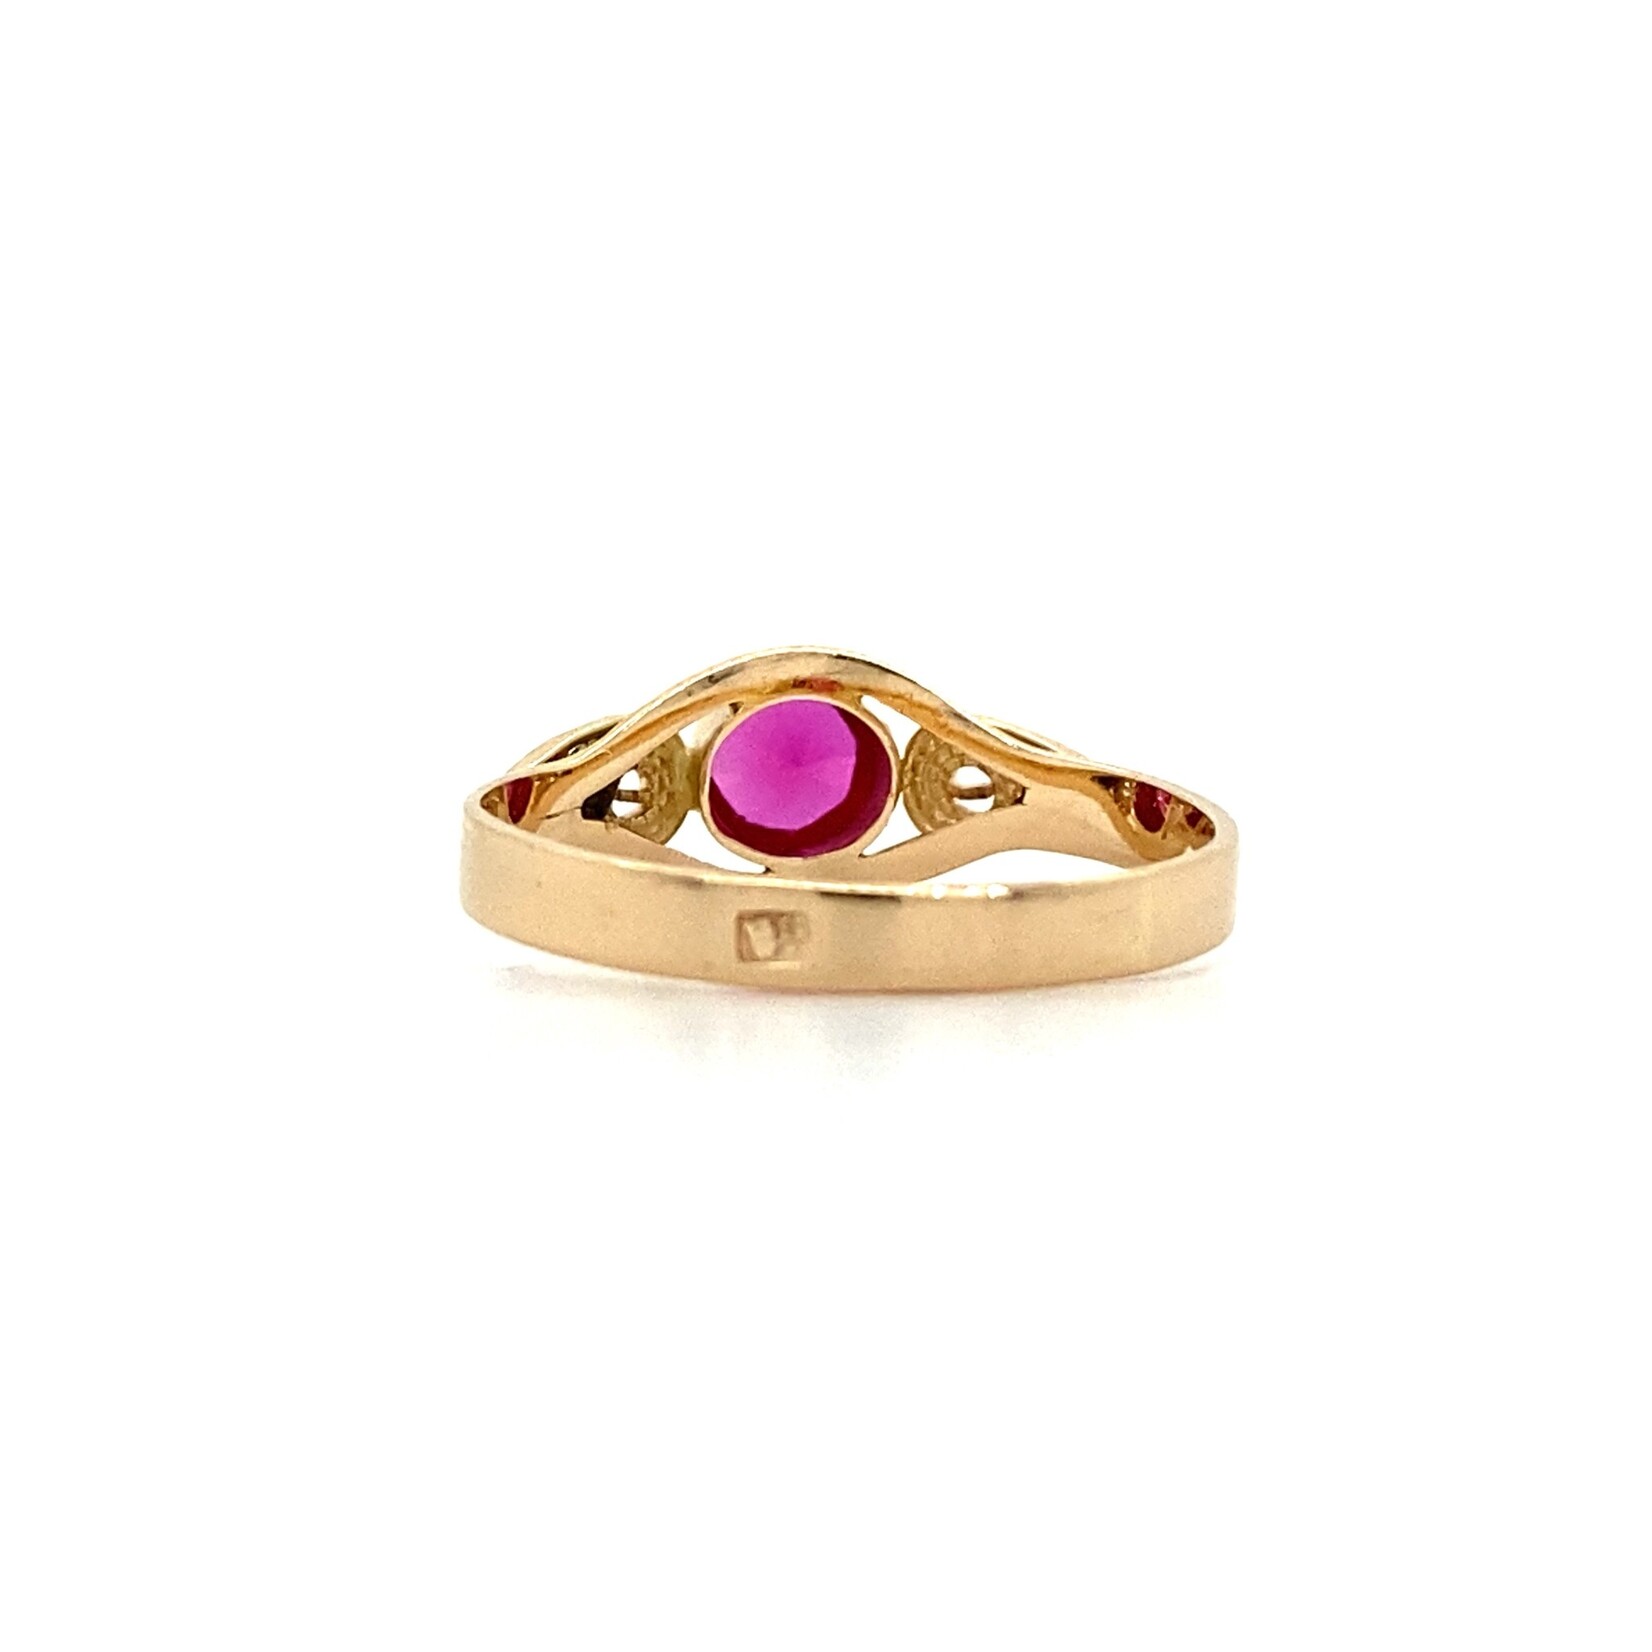 14K Yellow Gold Red stone ring sz7.25